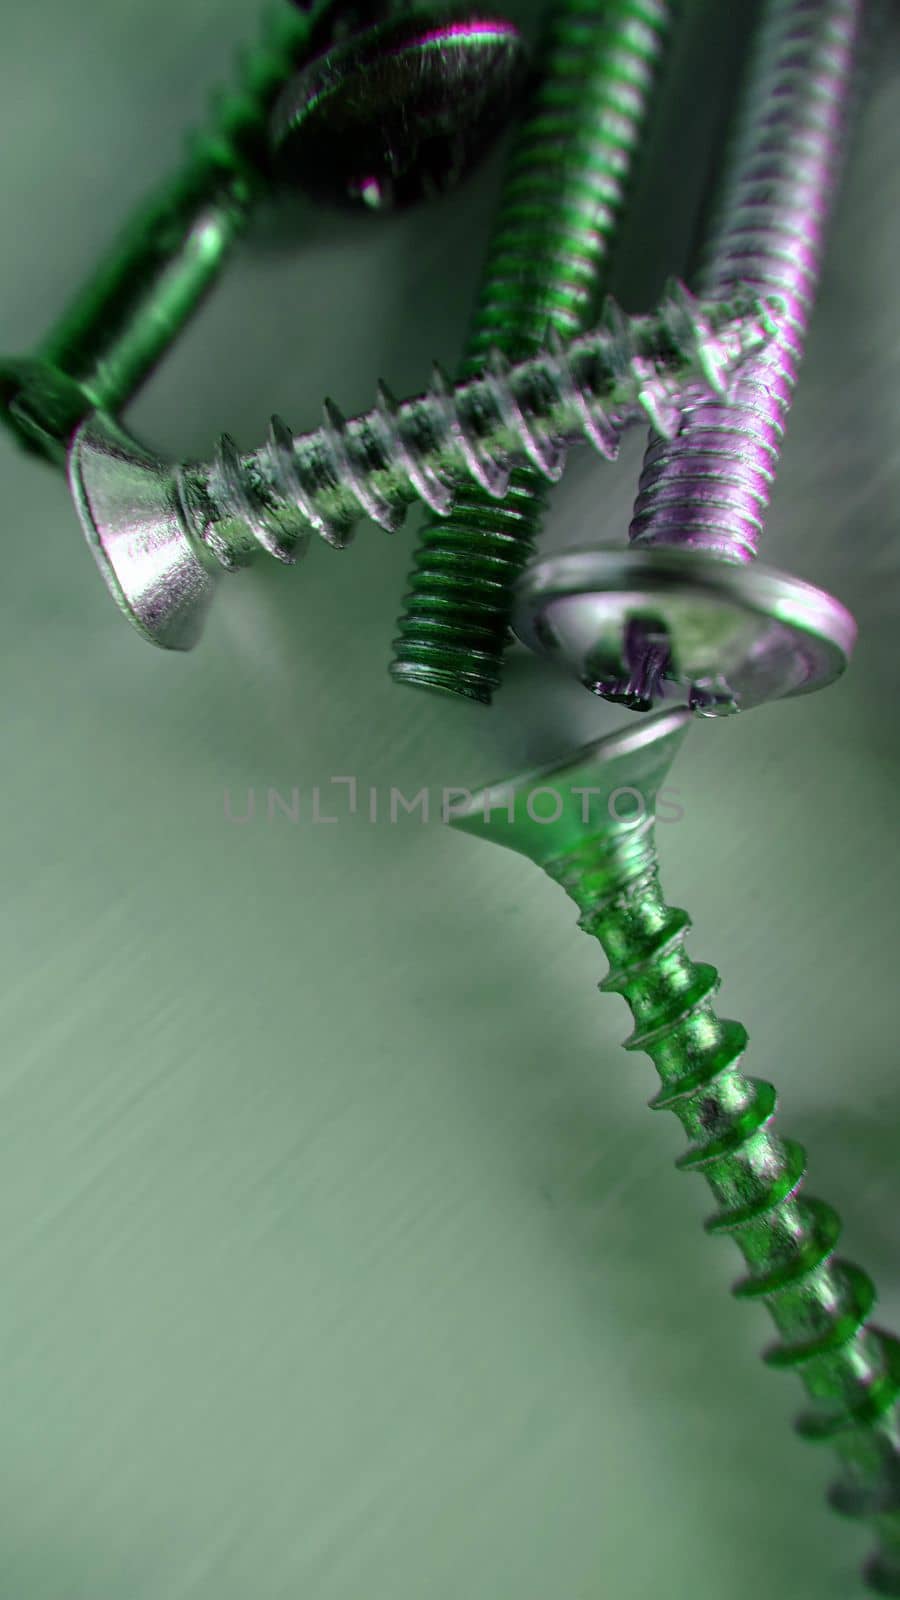 Background image of screws bolts of different sizes on the table by Mastak80